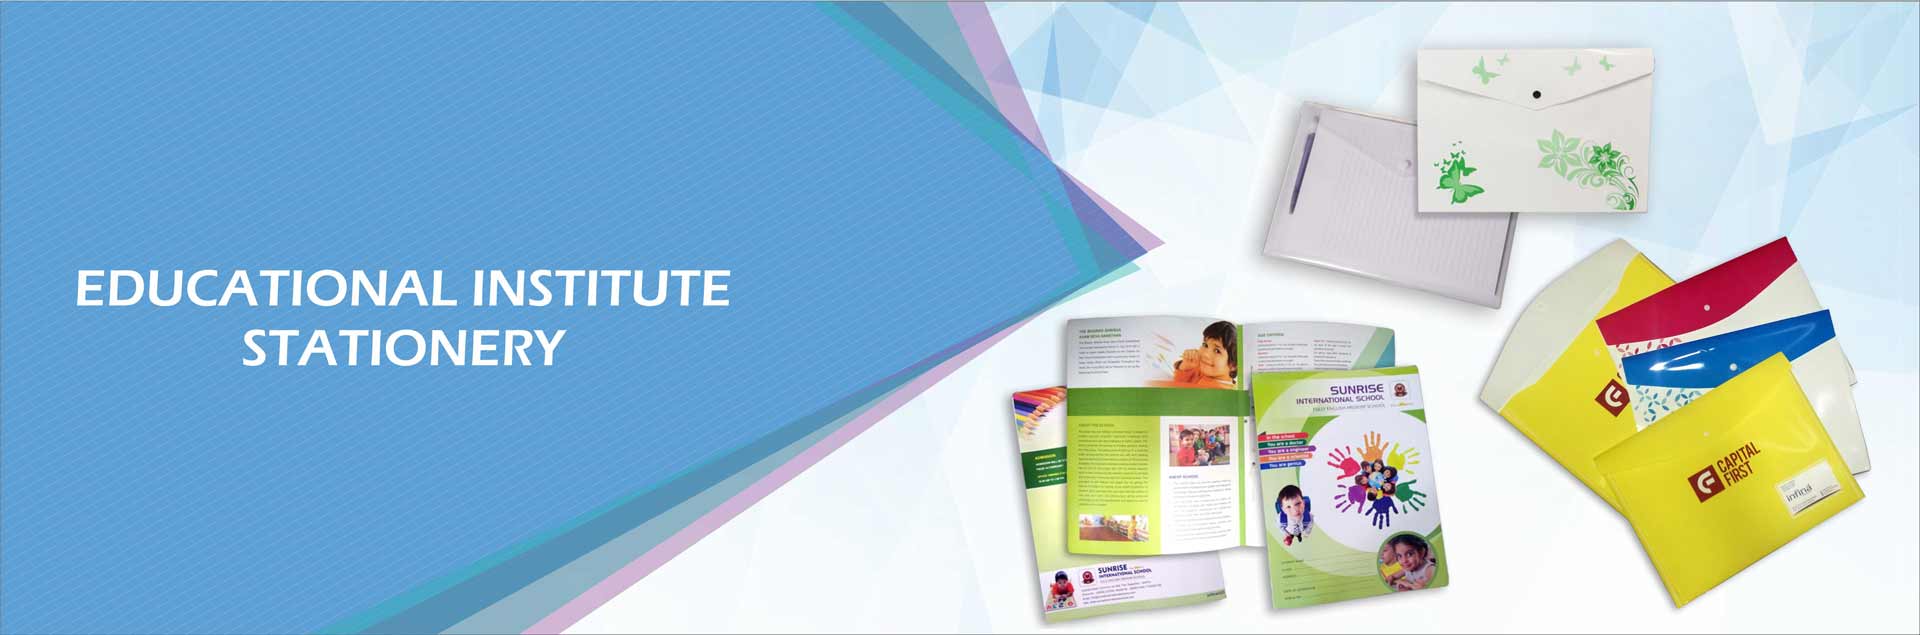 Educational Institute Stationery